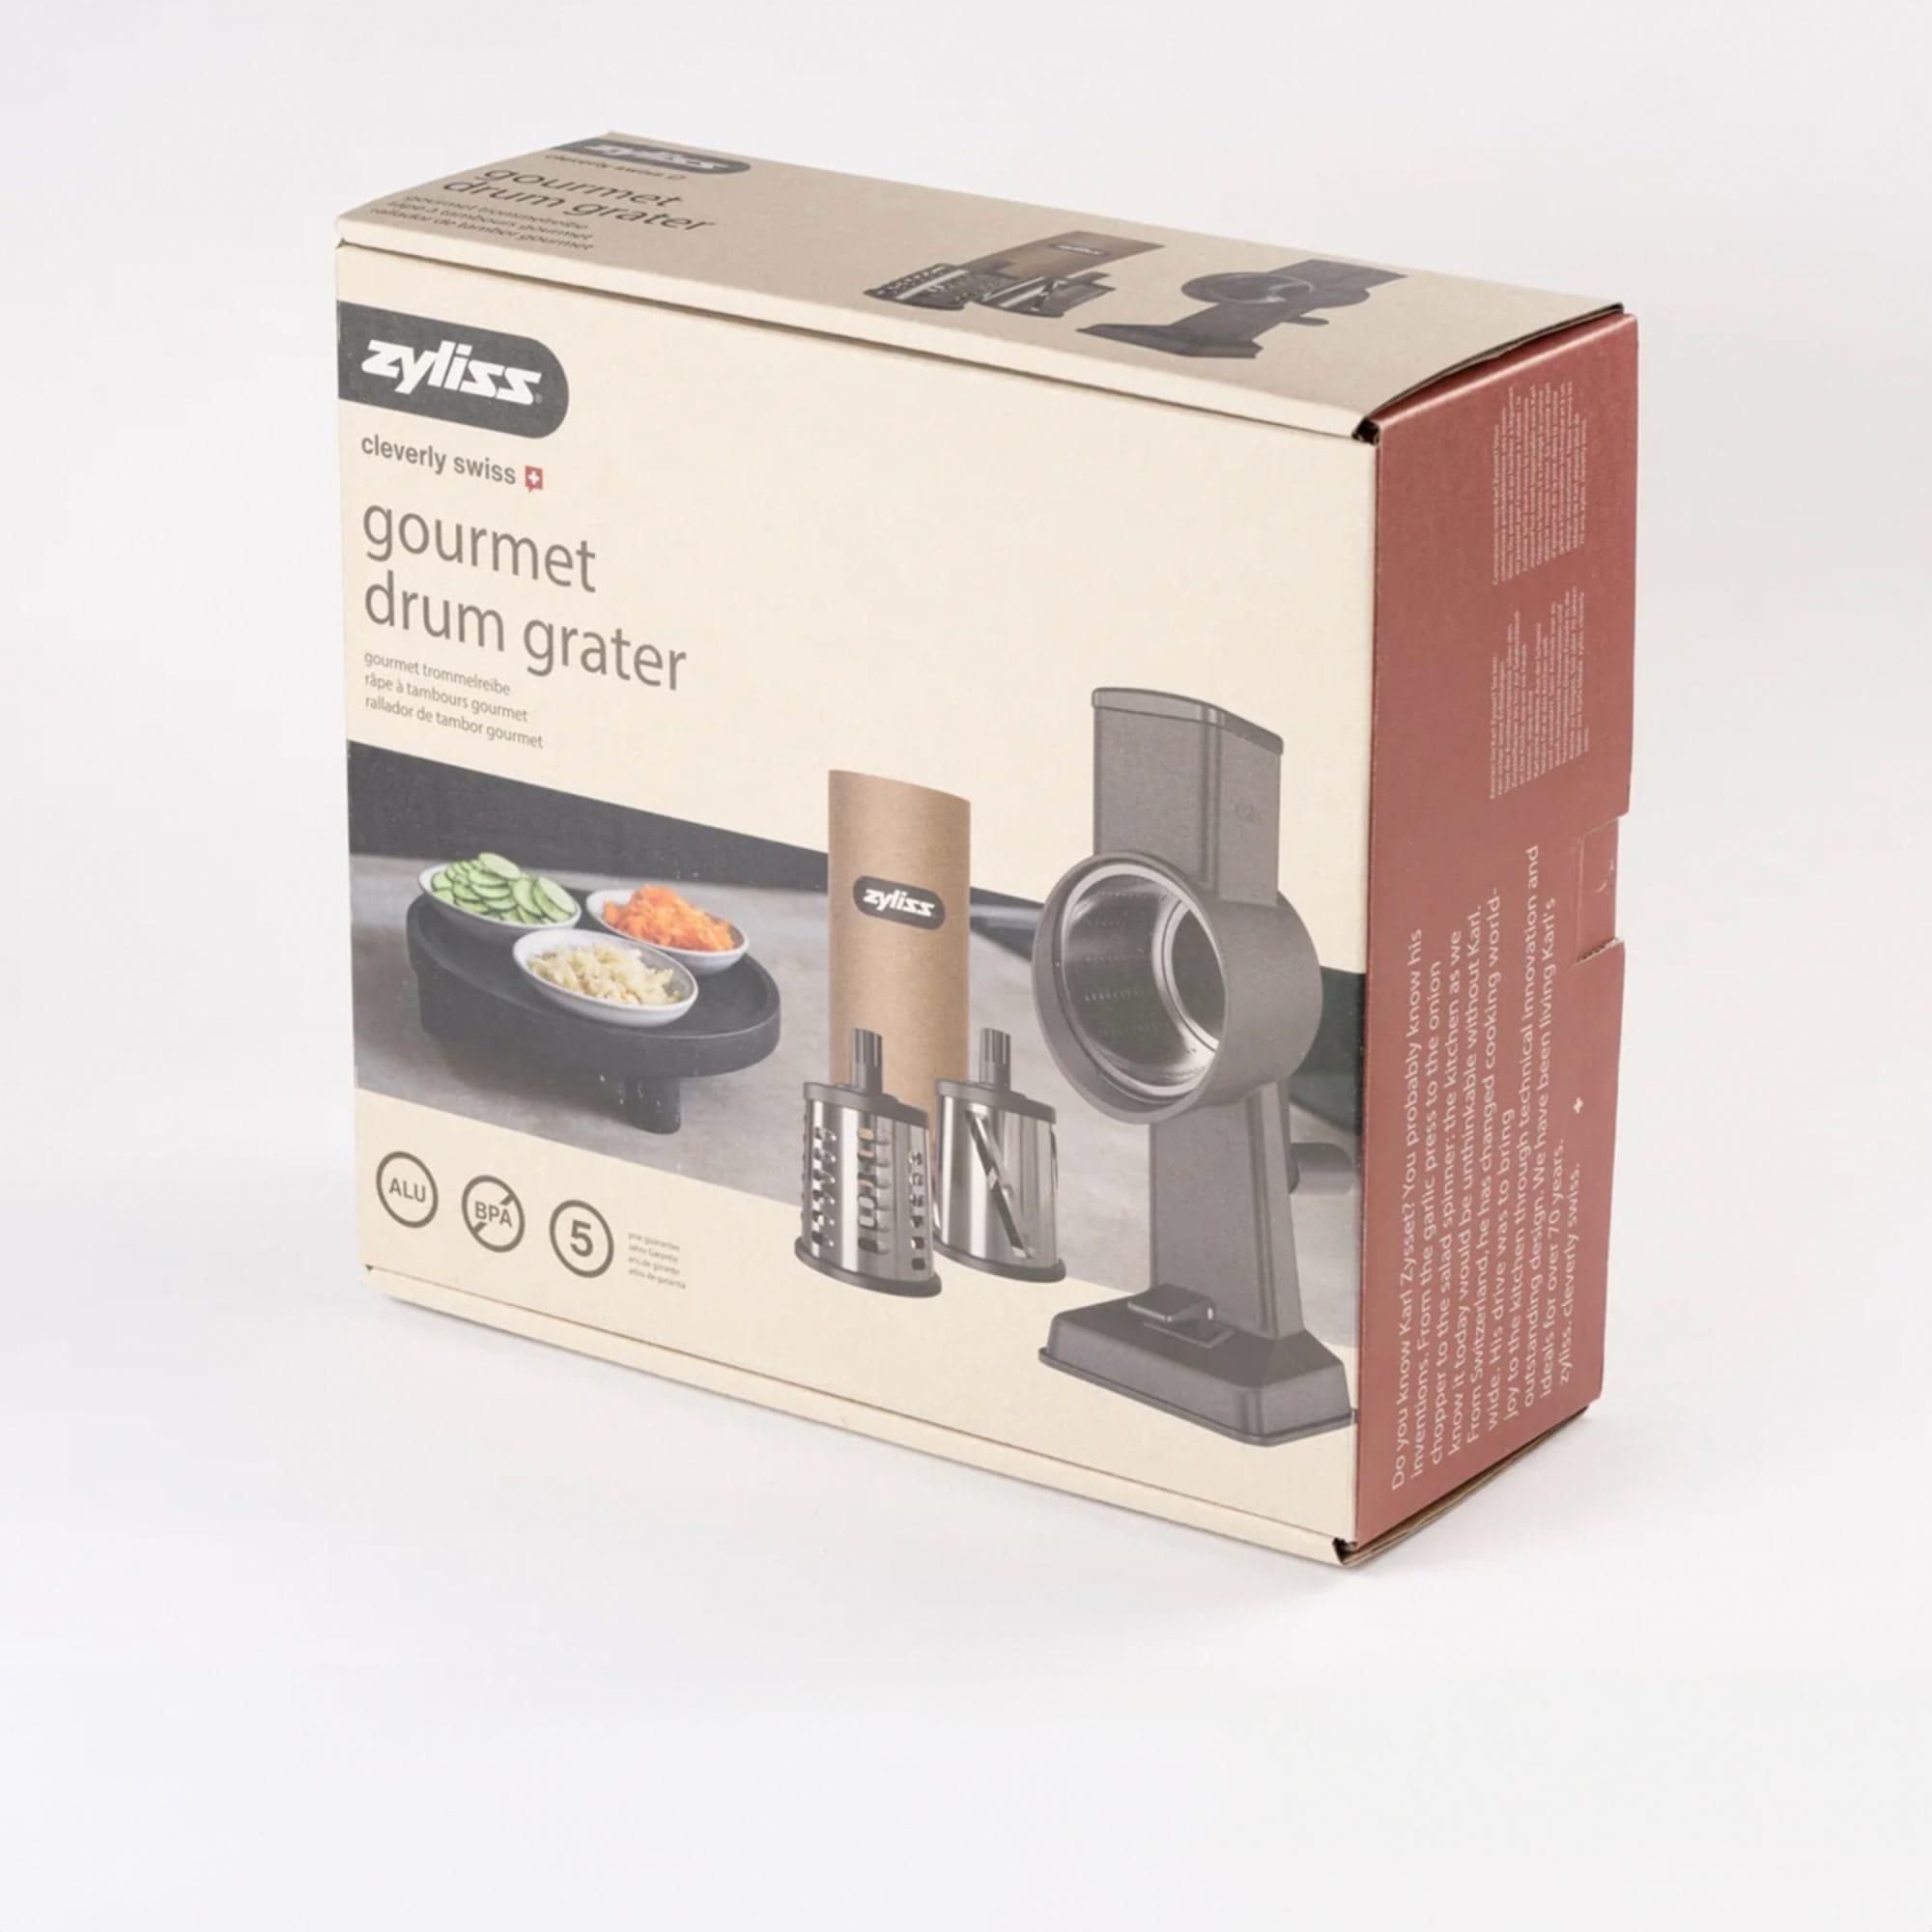 Zyliss Gourmet Drum Grater with 3 Drums Image 7